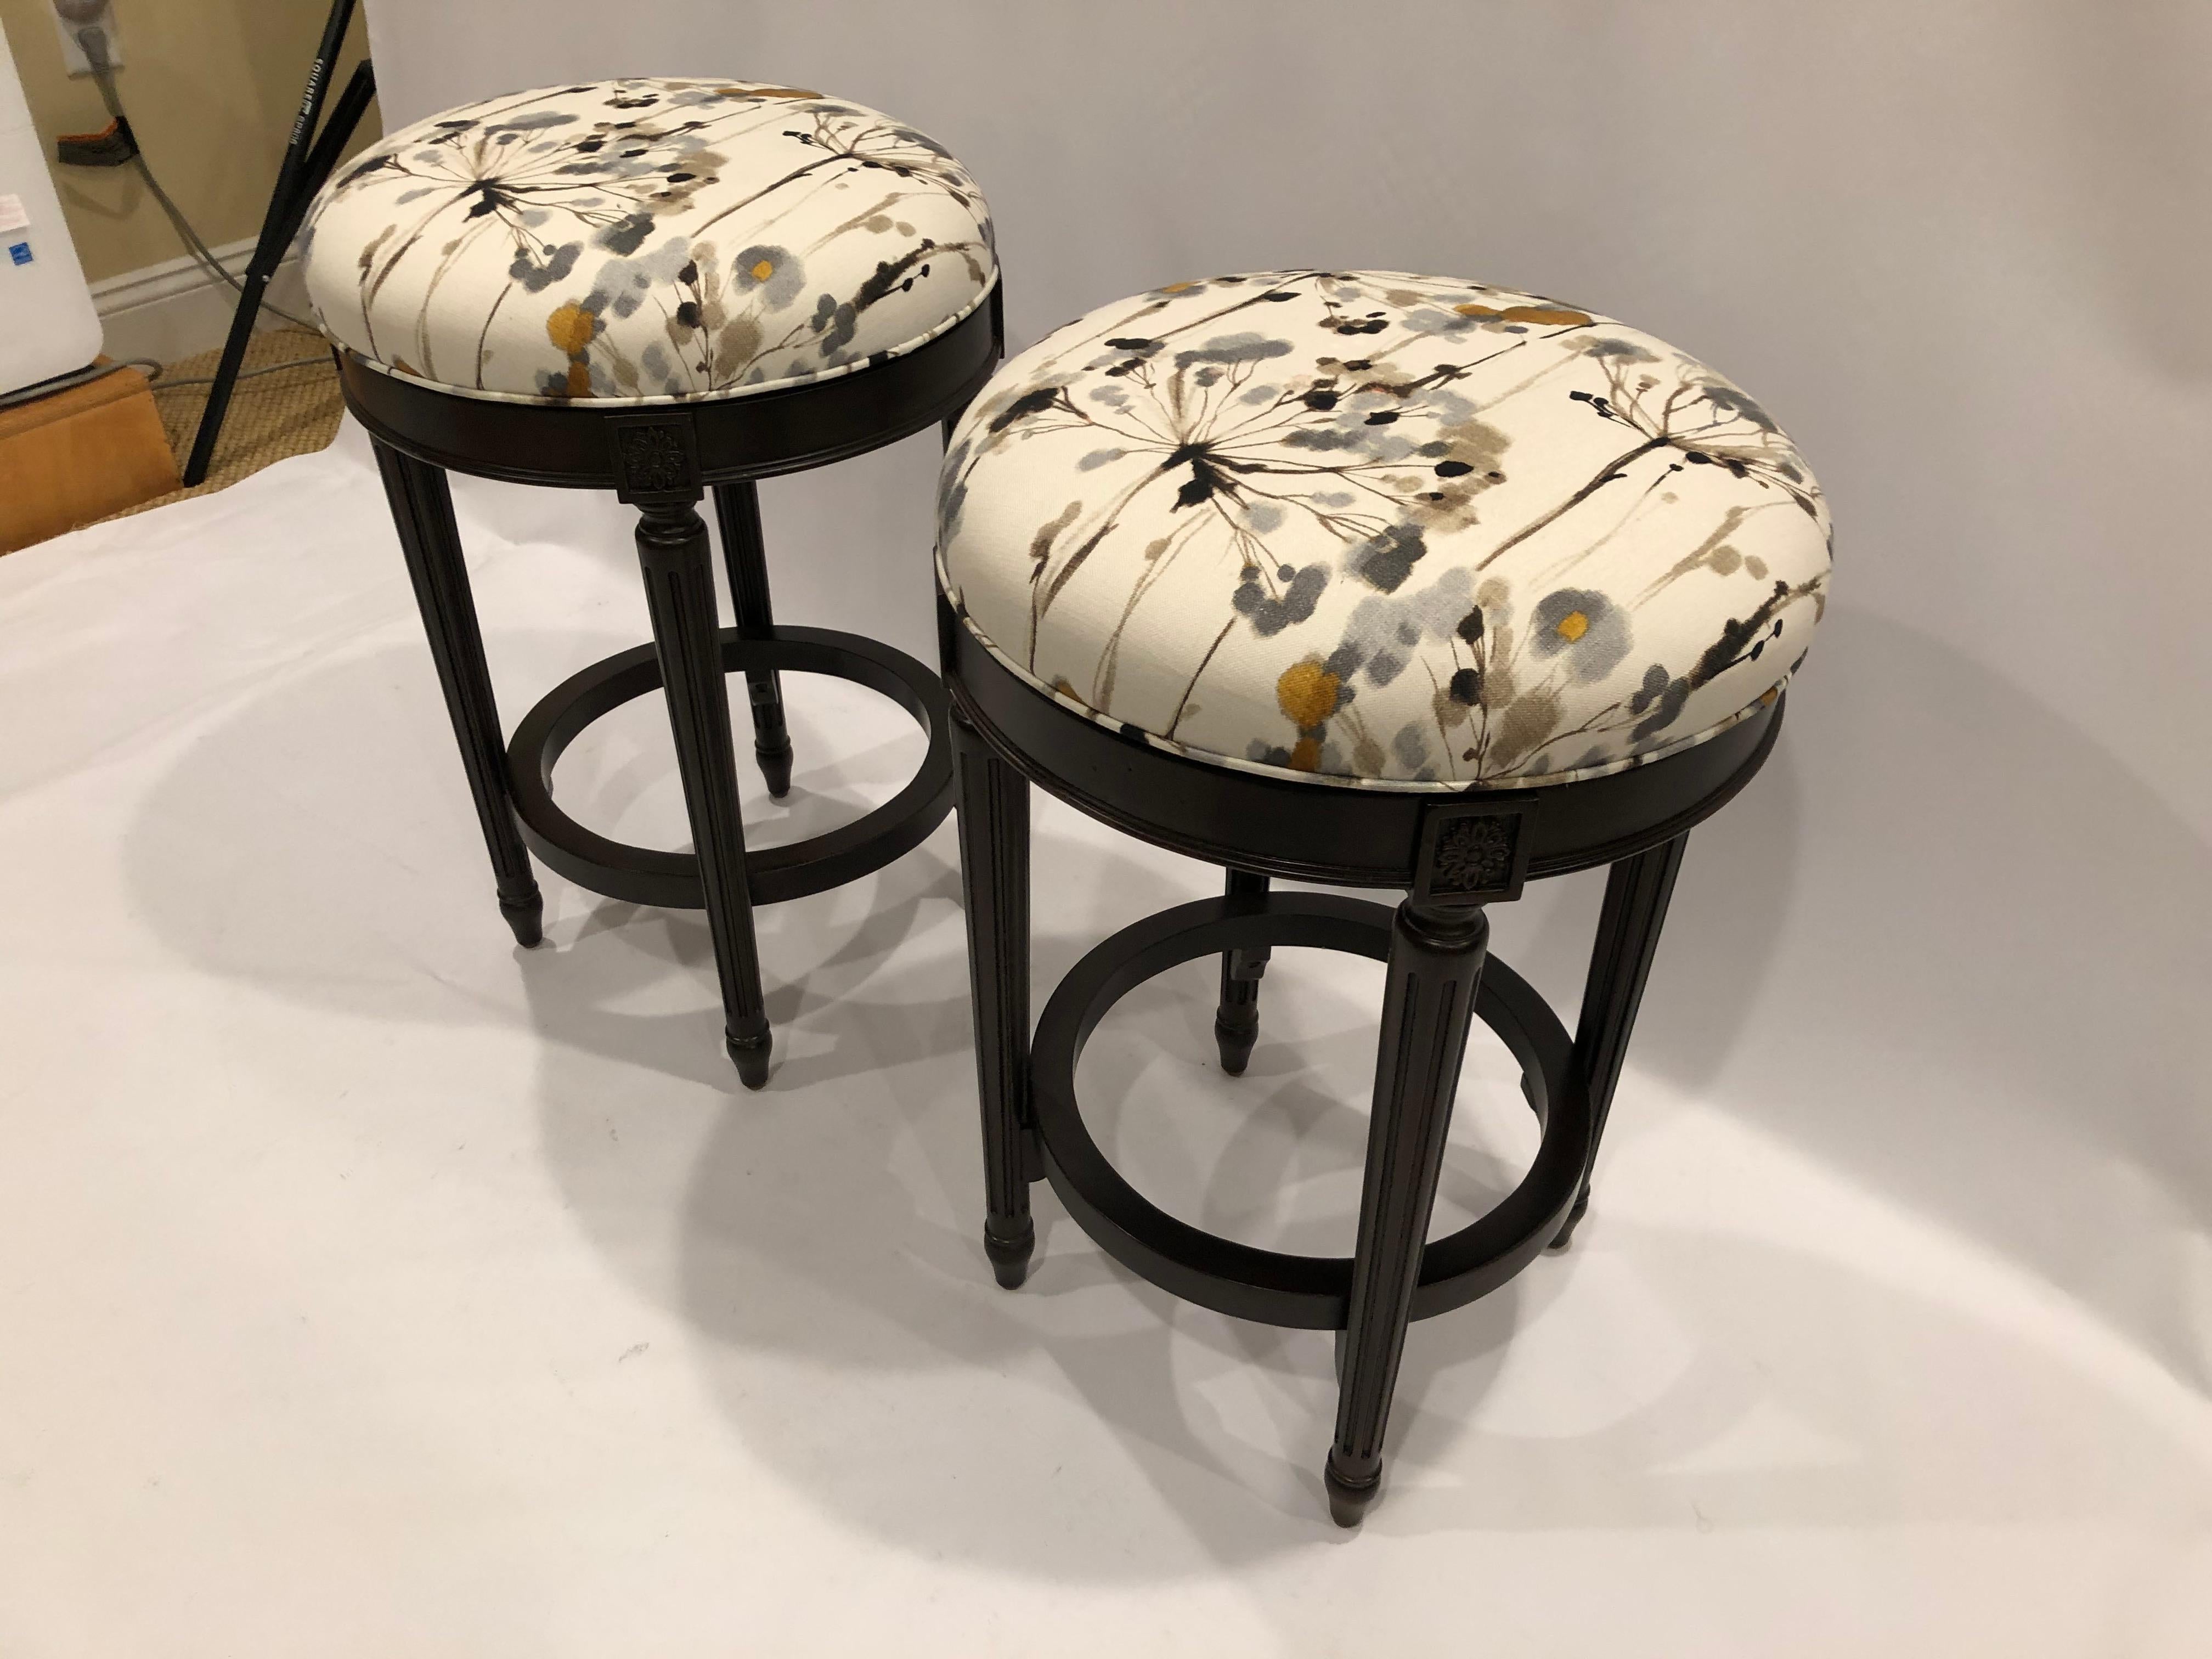 Plush well made ebonized wood counter stools having upholstered seats that swivel 360 degrees, and solid base with circular foot rest.